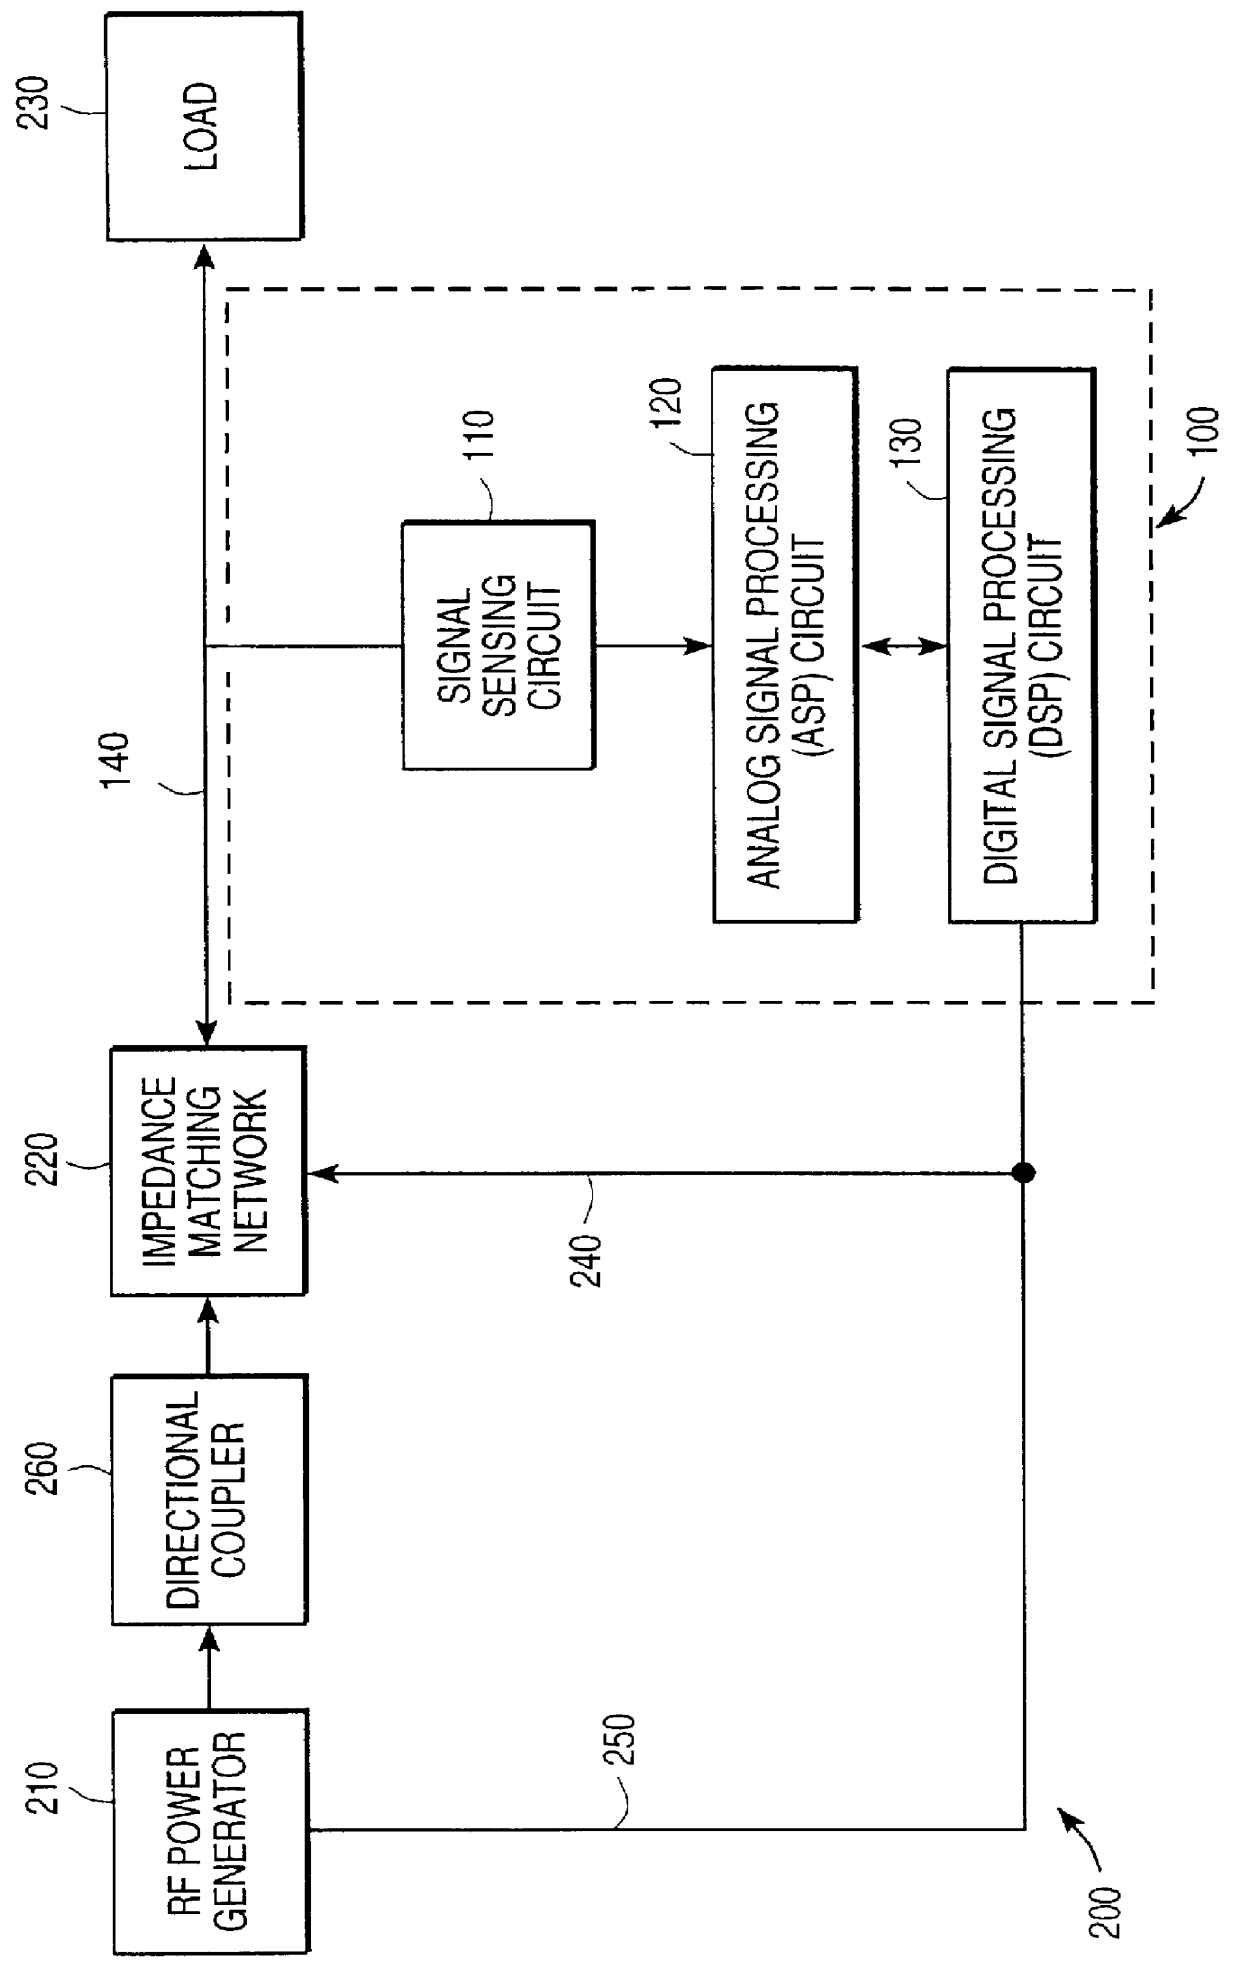 Method and apparatus for monitoring parameters of an RF powered load in the presence of harmonics